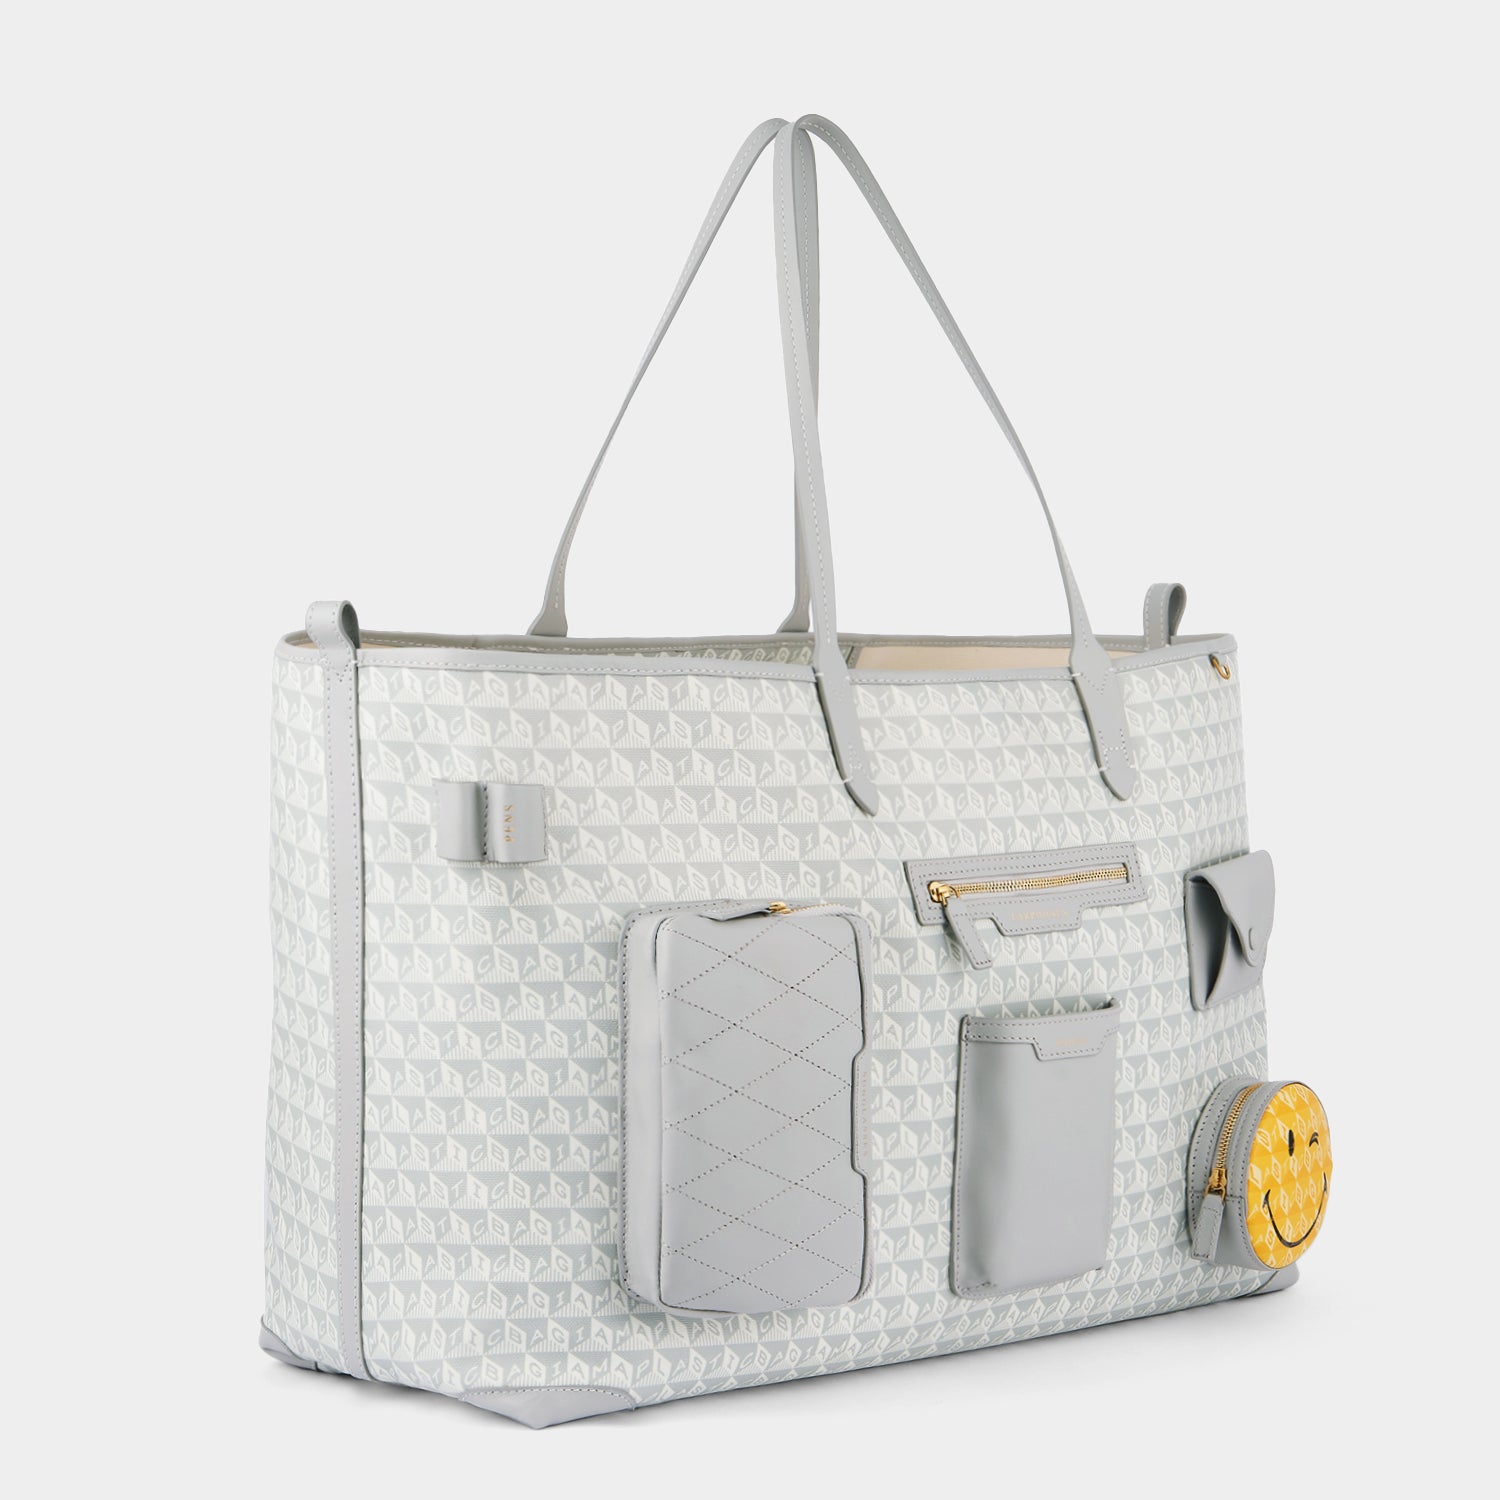 I am a Plastic Bag Wink XL Tote -

                  
                    Recycled Canvas in Frost -
                  

                  Anya Hindmarch EU
